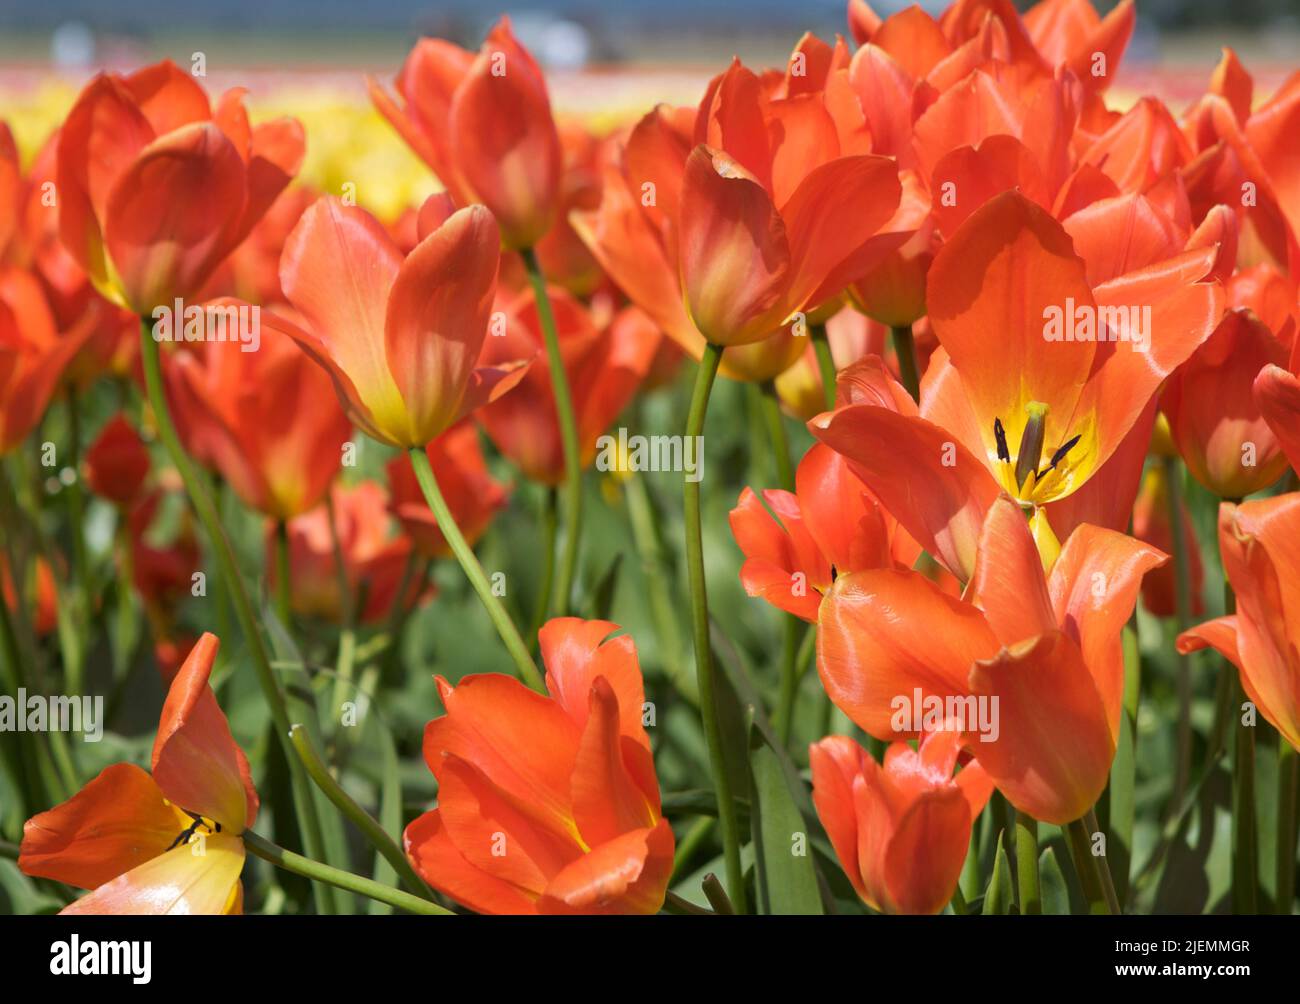 Closeup image of orange tulips in field on a sunny day. Stock Photo